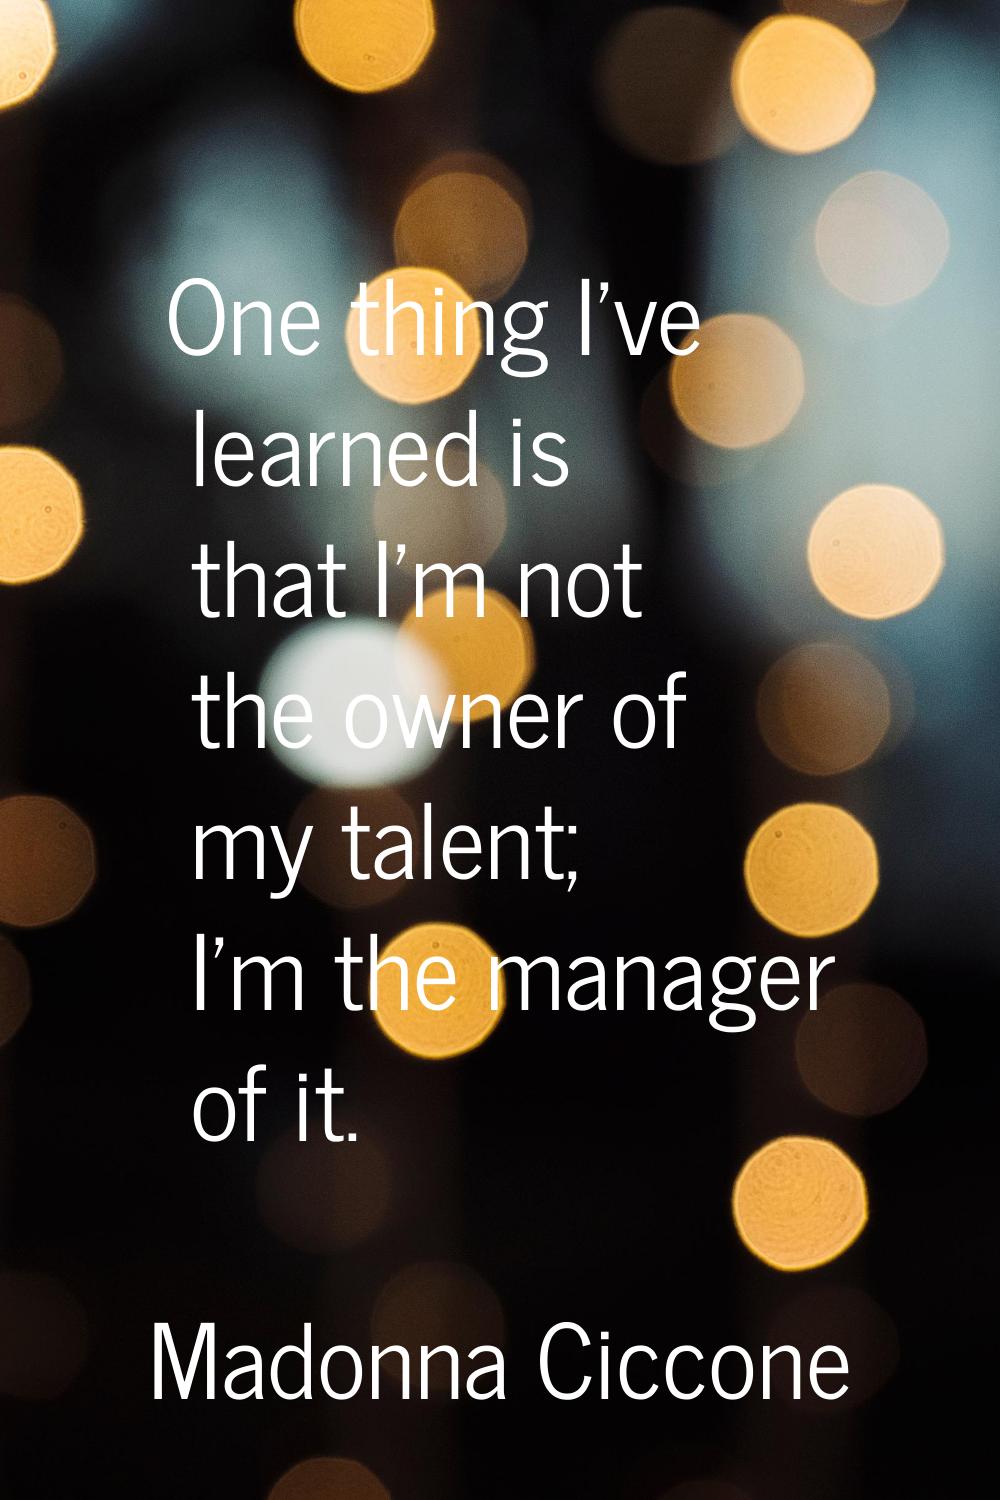 One thing I've learned is that I'm not the owner of my talent; I'm the manager of it.